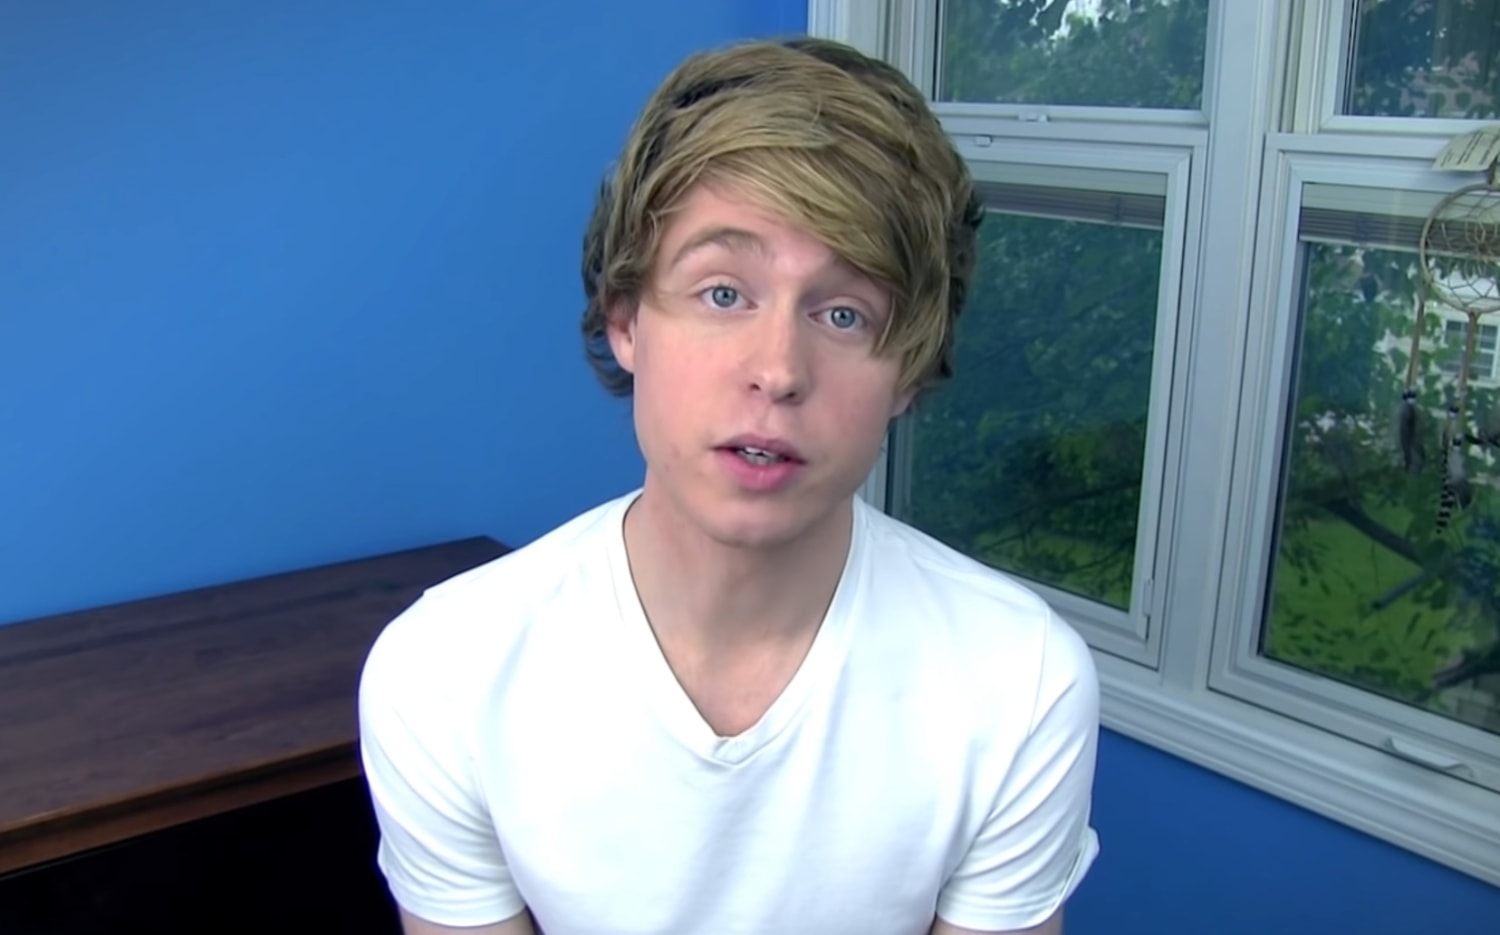 Boy Babes Porn - YouTube star Austin Jones pleads guilty to child porn charge